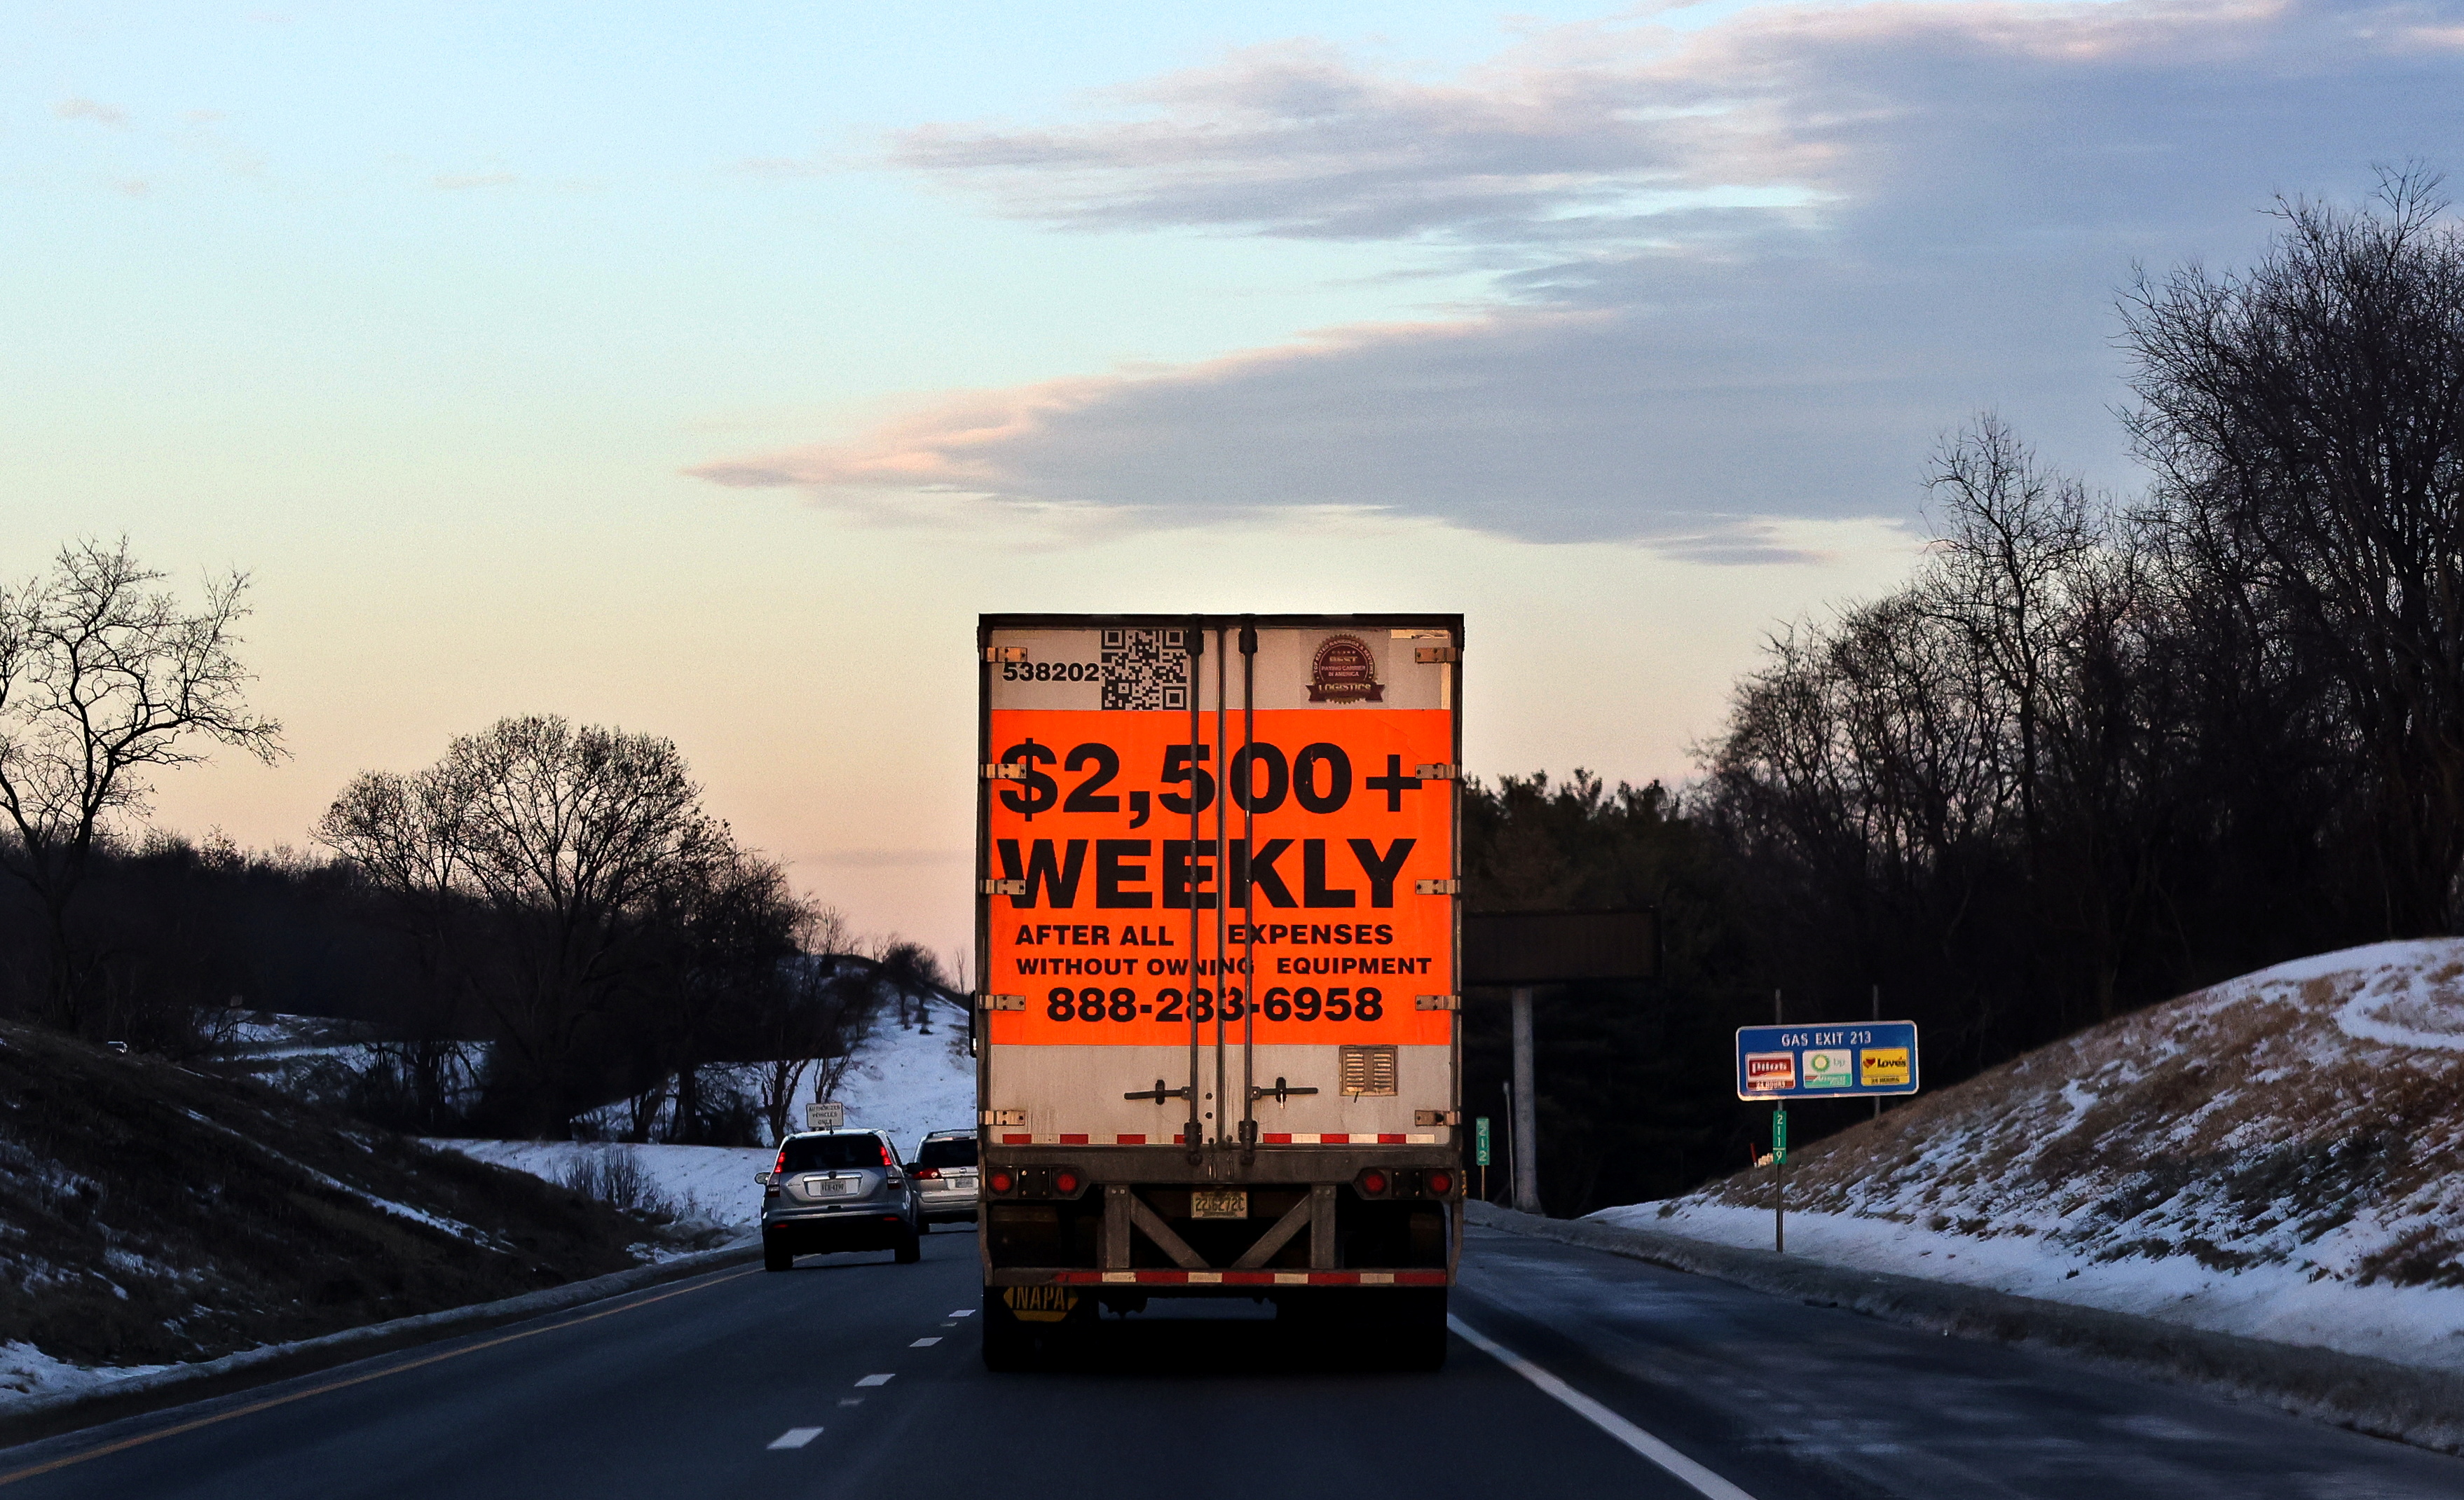 A tractor trailer advertising job opportunities drives south on Route 81 in Virginia